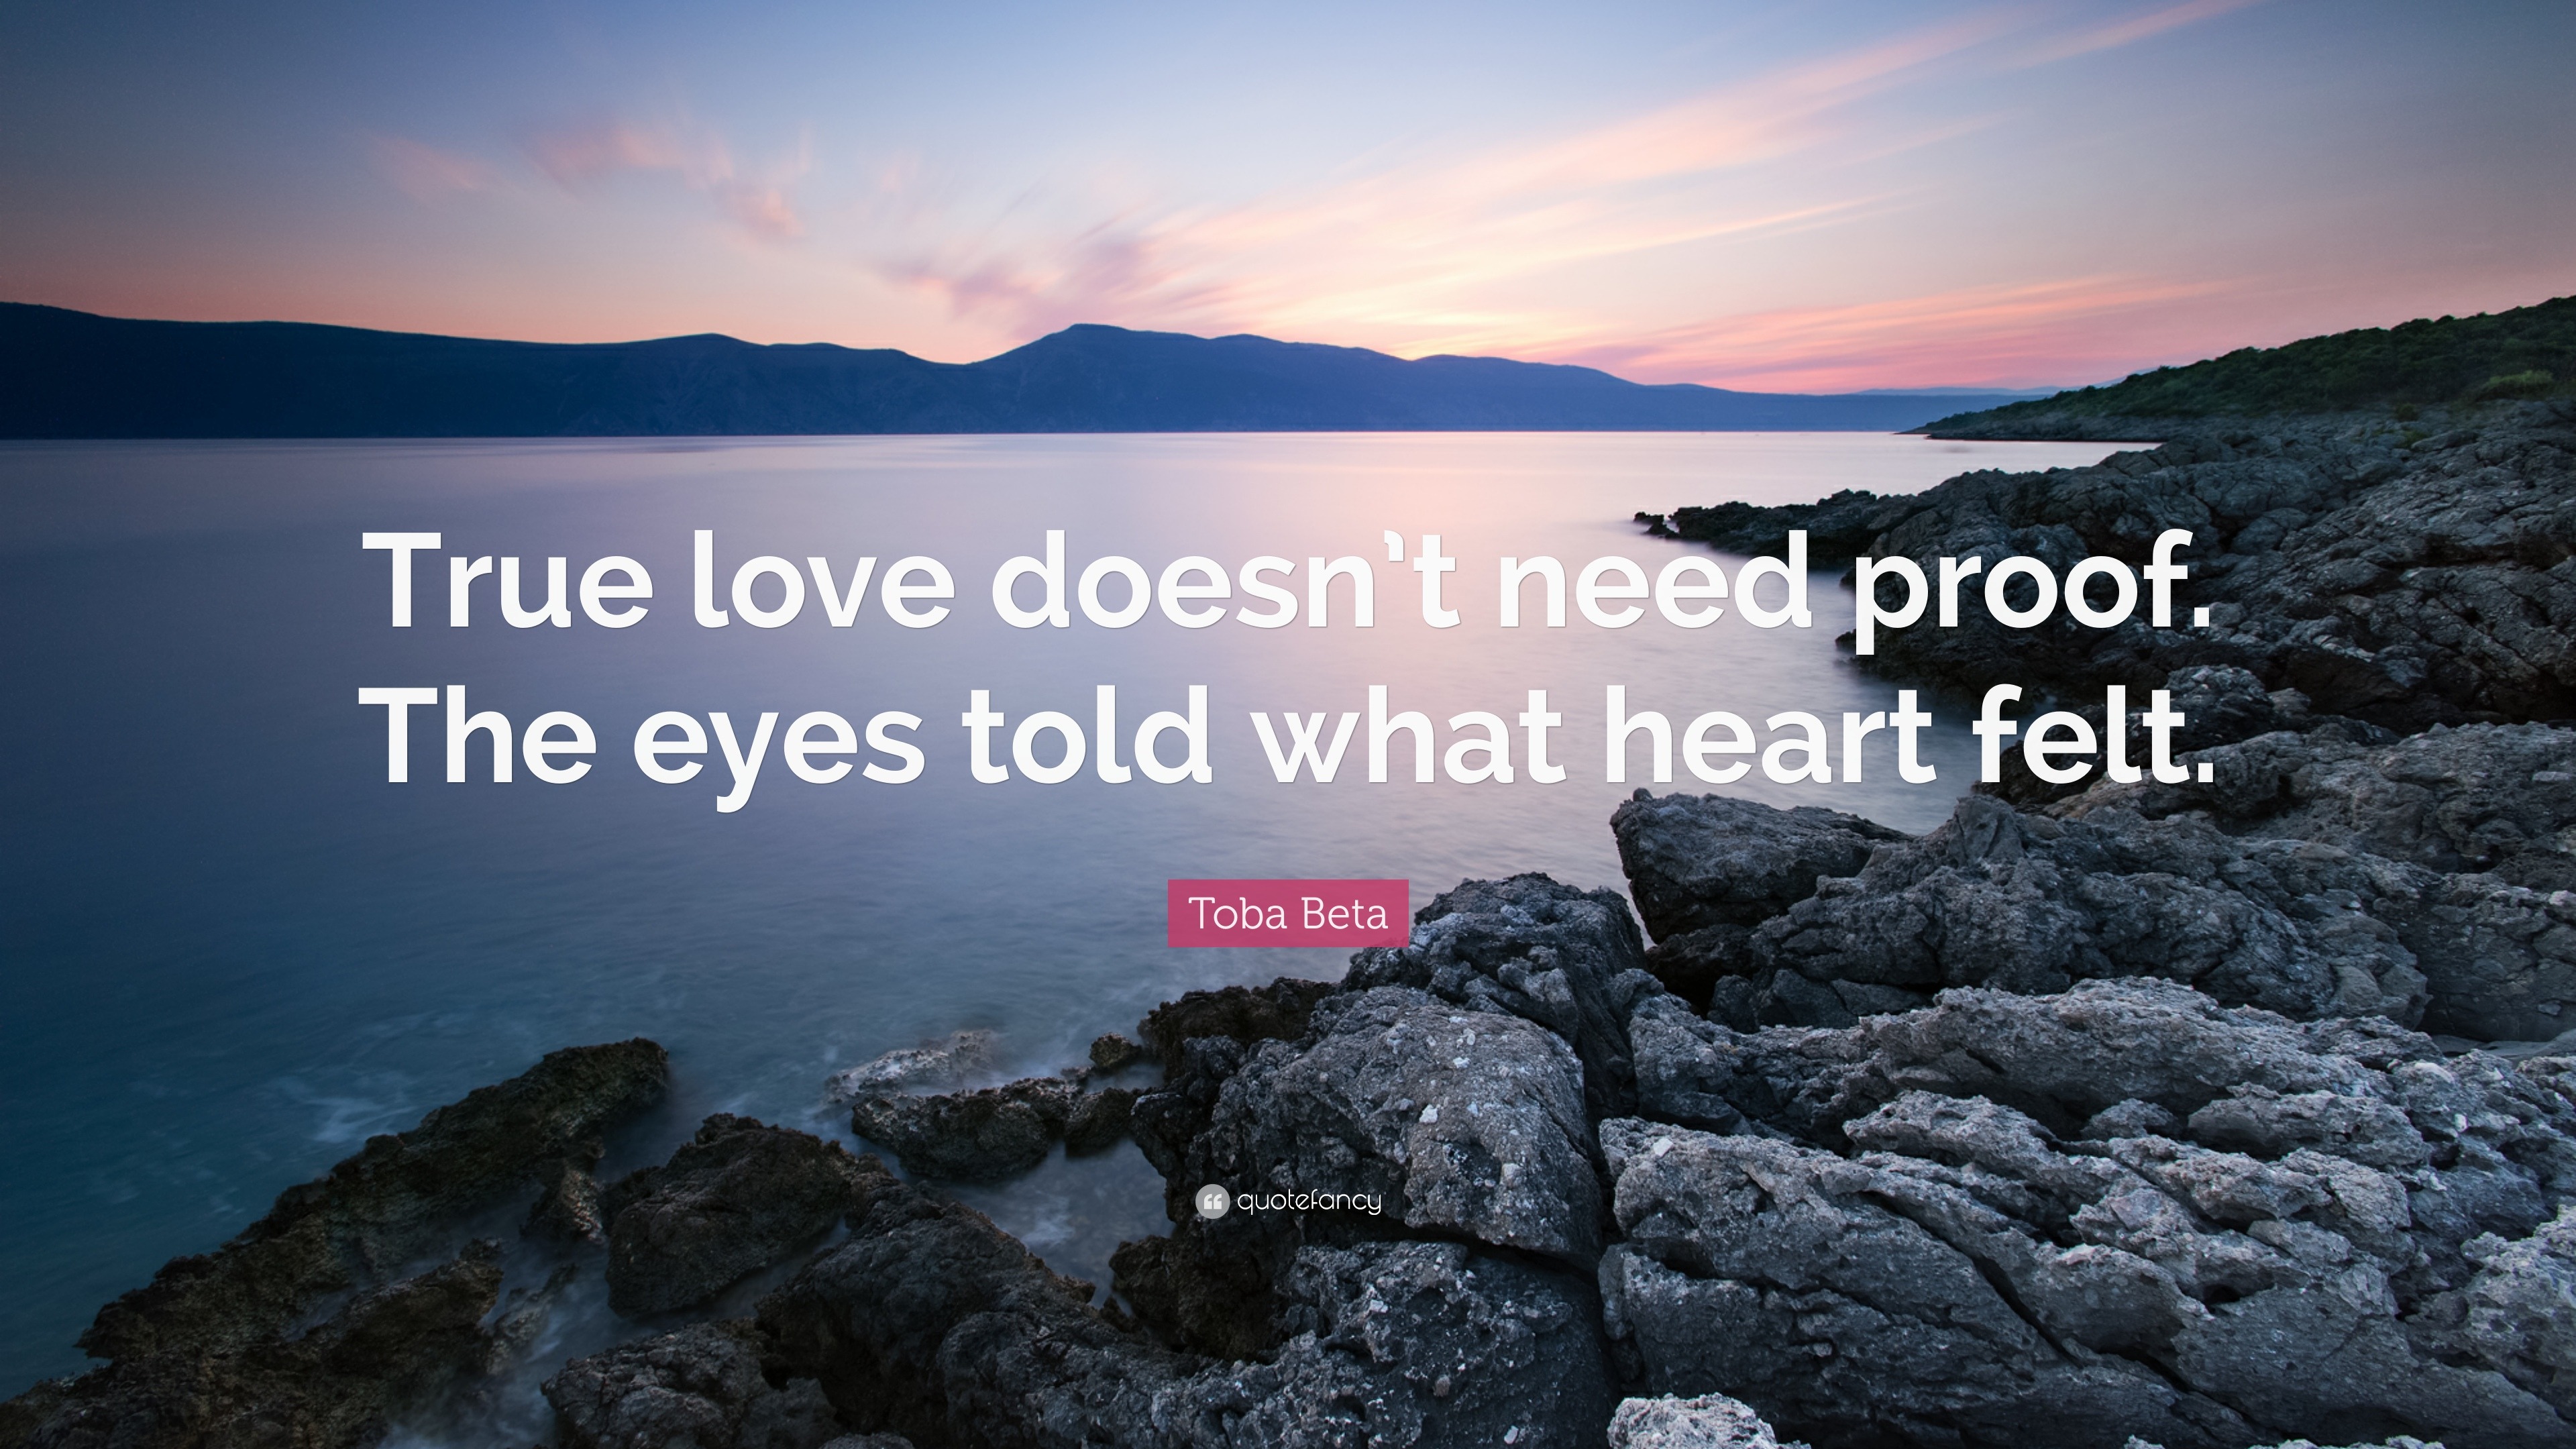 Toba Beta Quote “True love doesn t need proof The eyes told